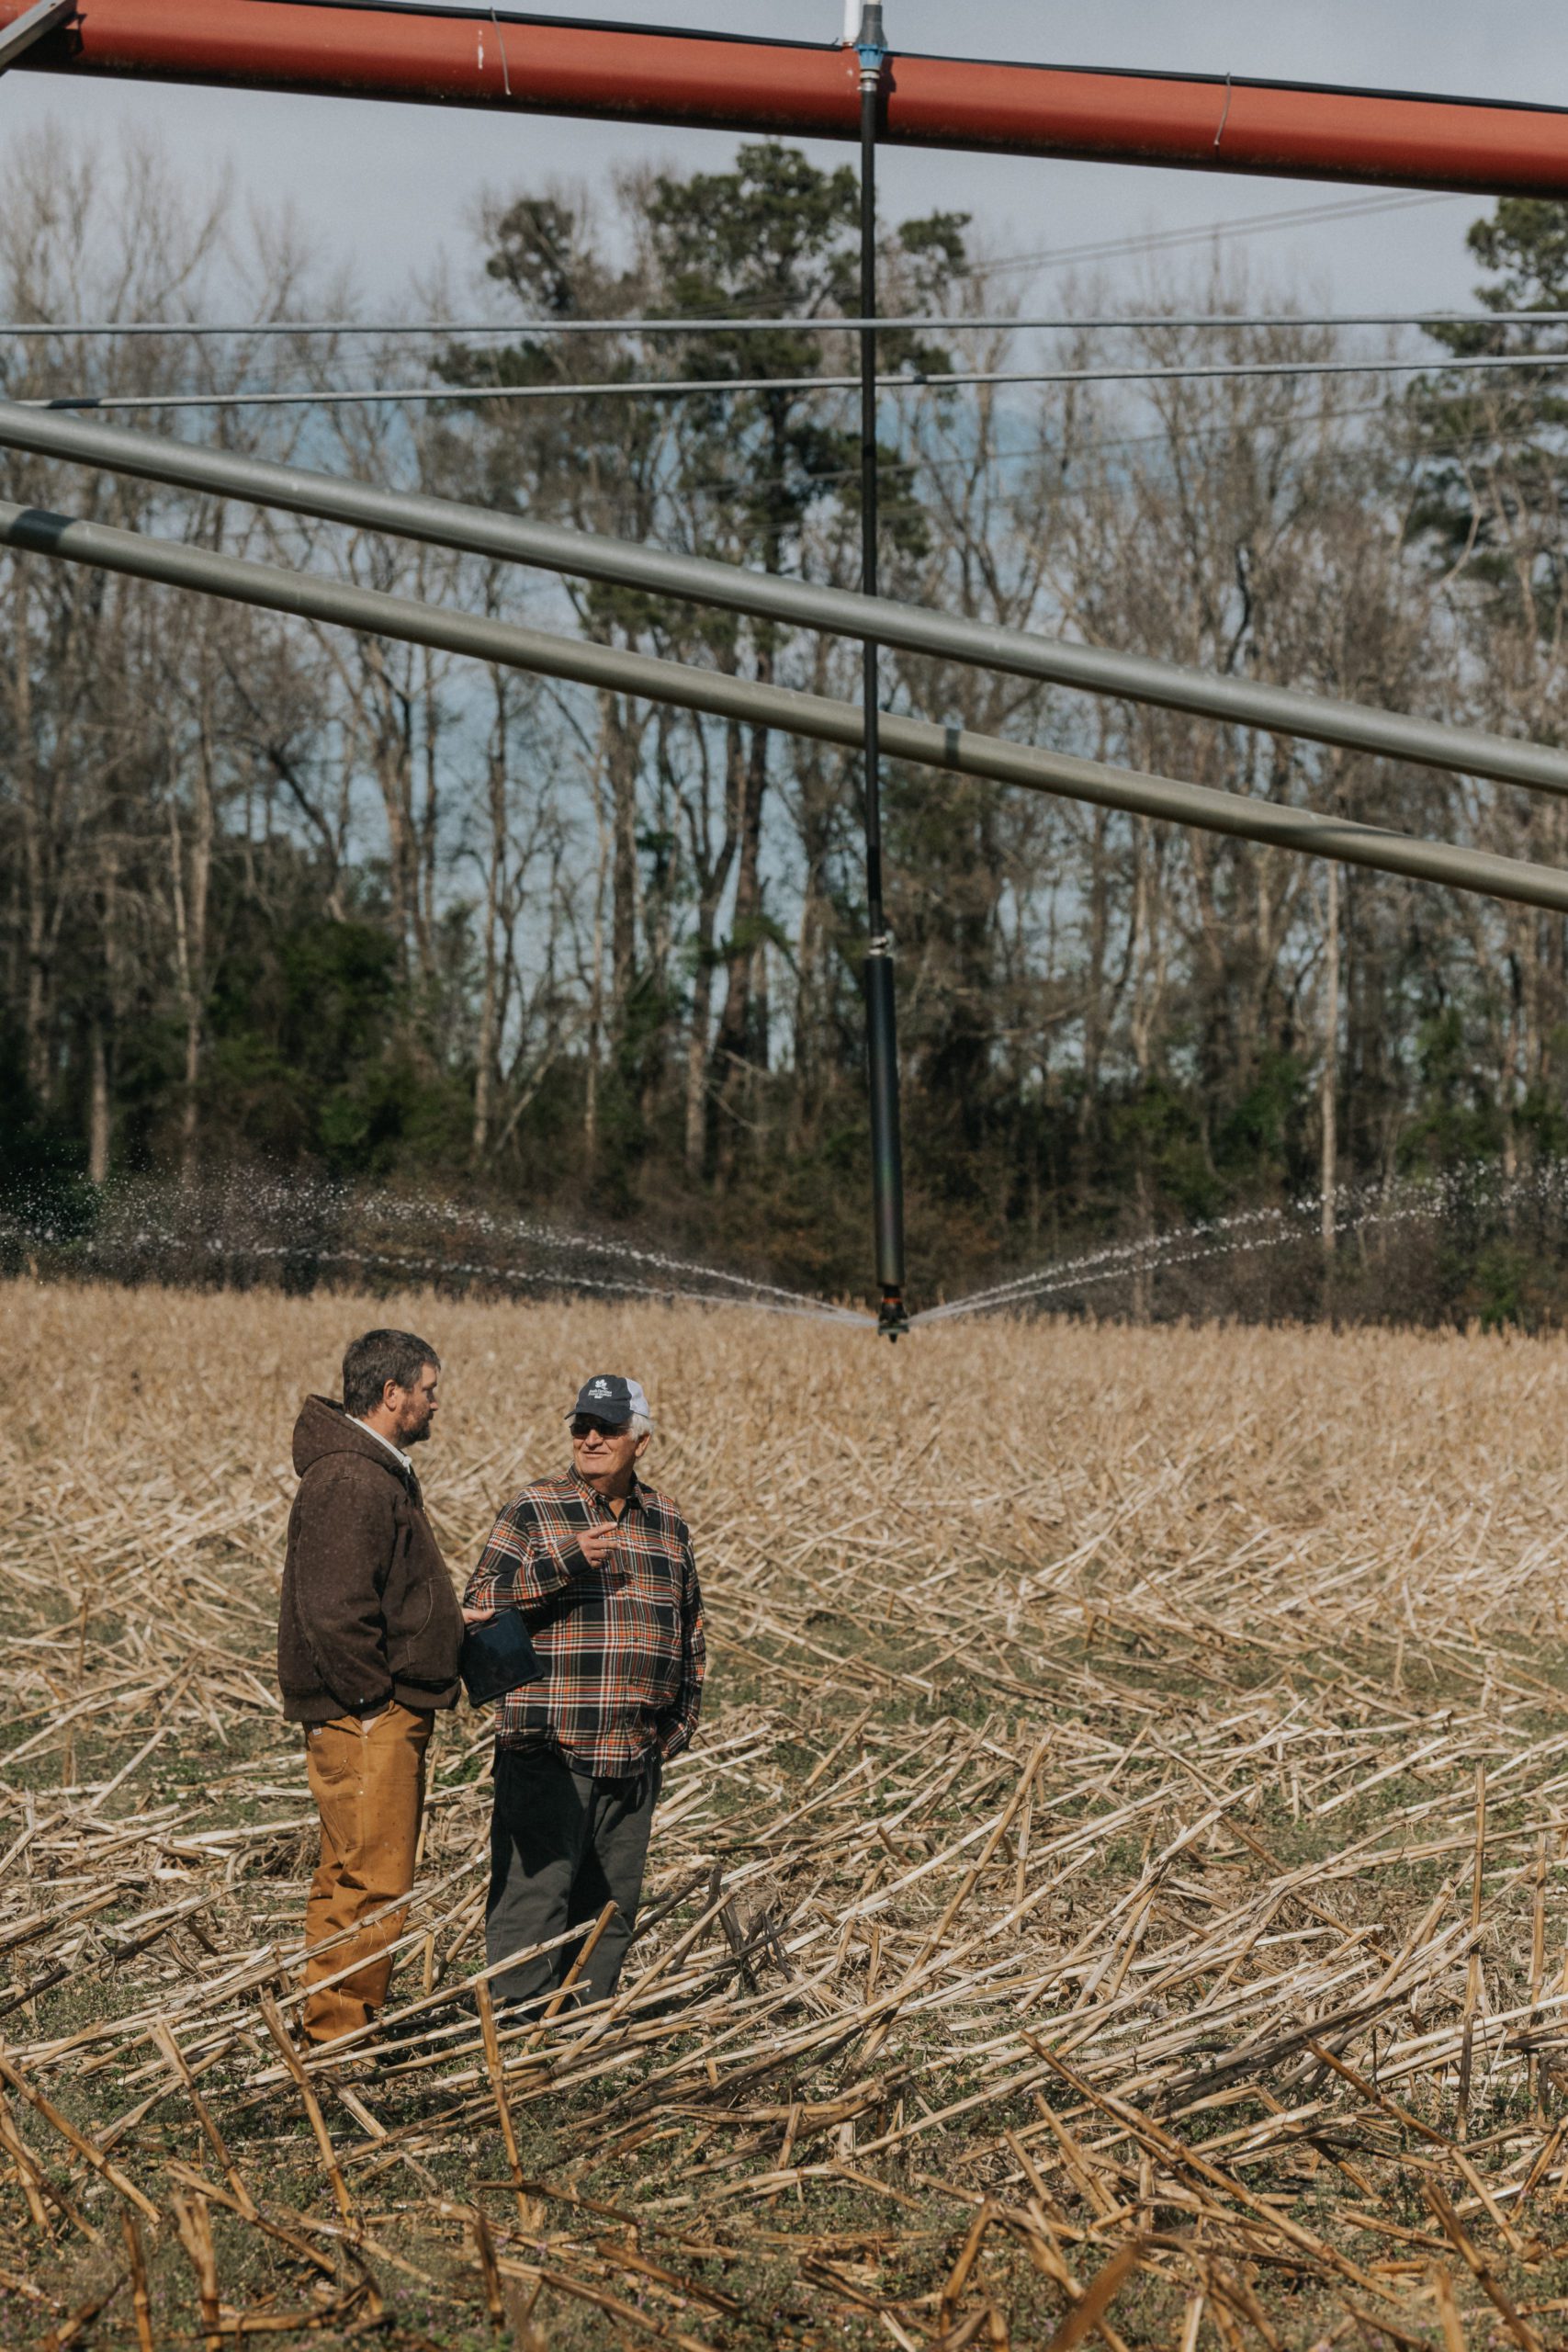 Clemson precision agriculture engineer Kendall Kirk and Bamberg County farmer Richard Rentz stand in a field as an irrigation sprayer works in the background. 